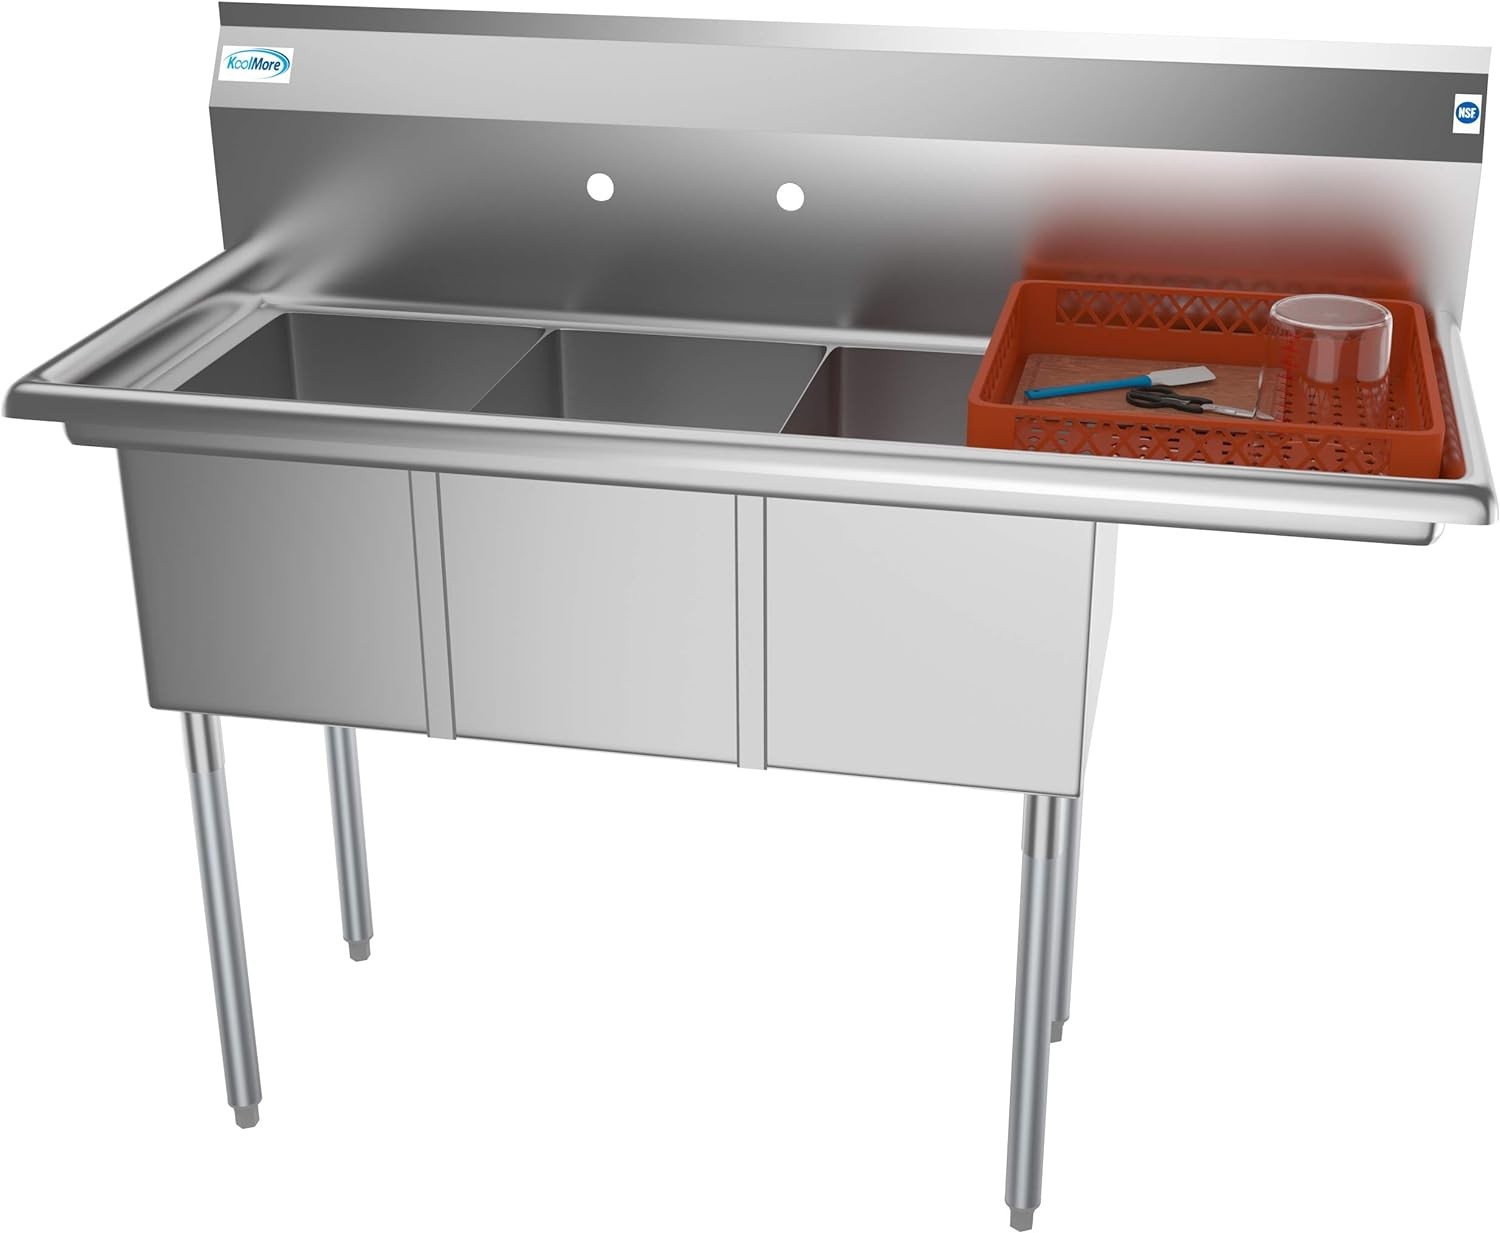 Koolmore SC121610-12R3 51" Three Compartment Stainless Steel Sink with Right Drainboard